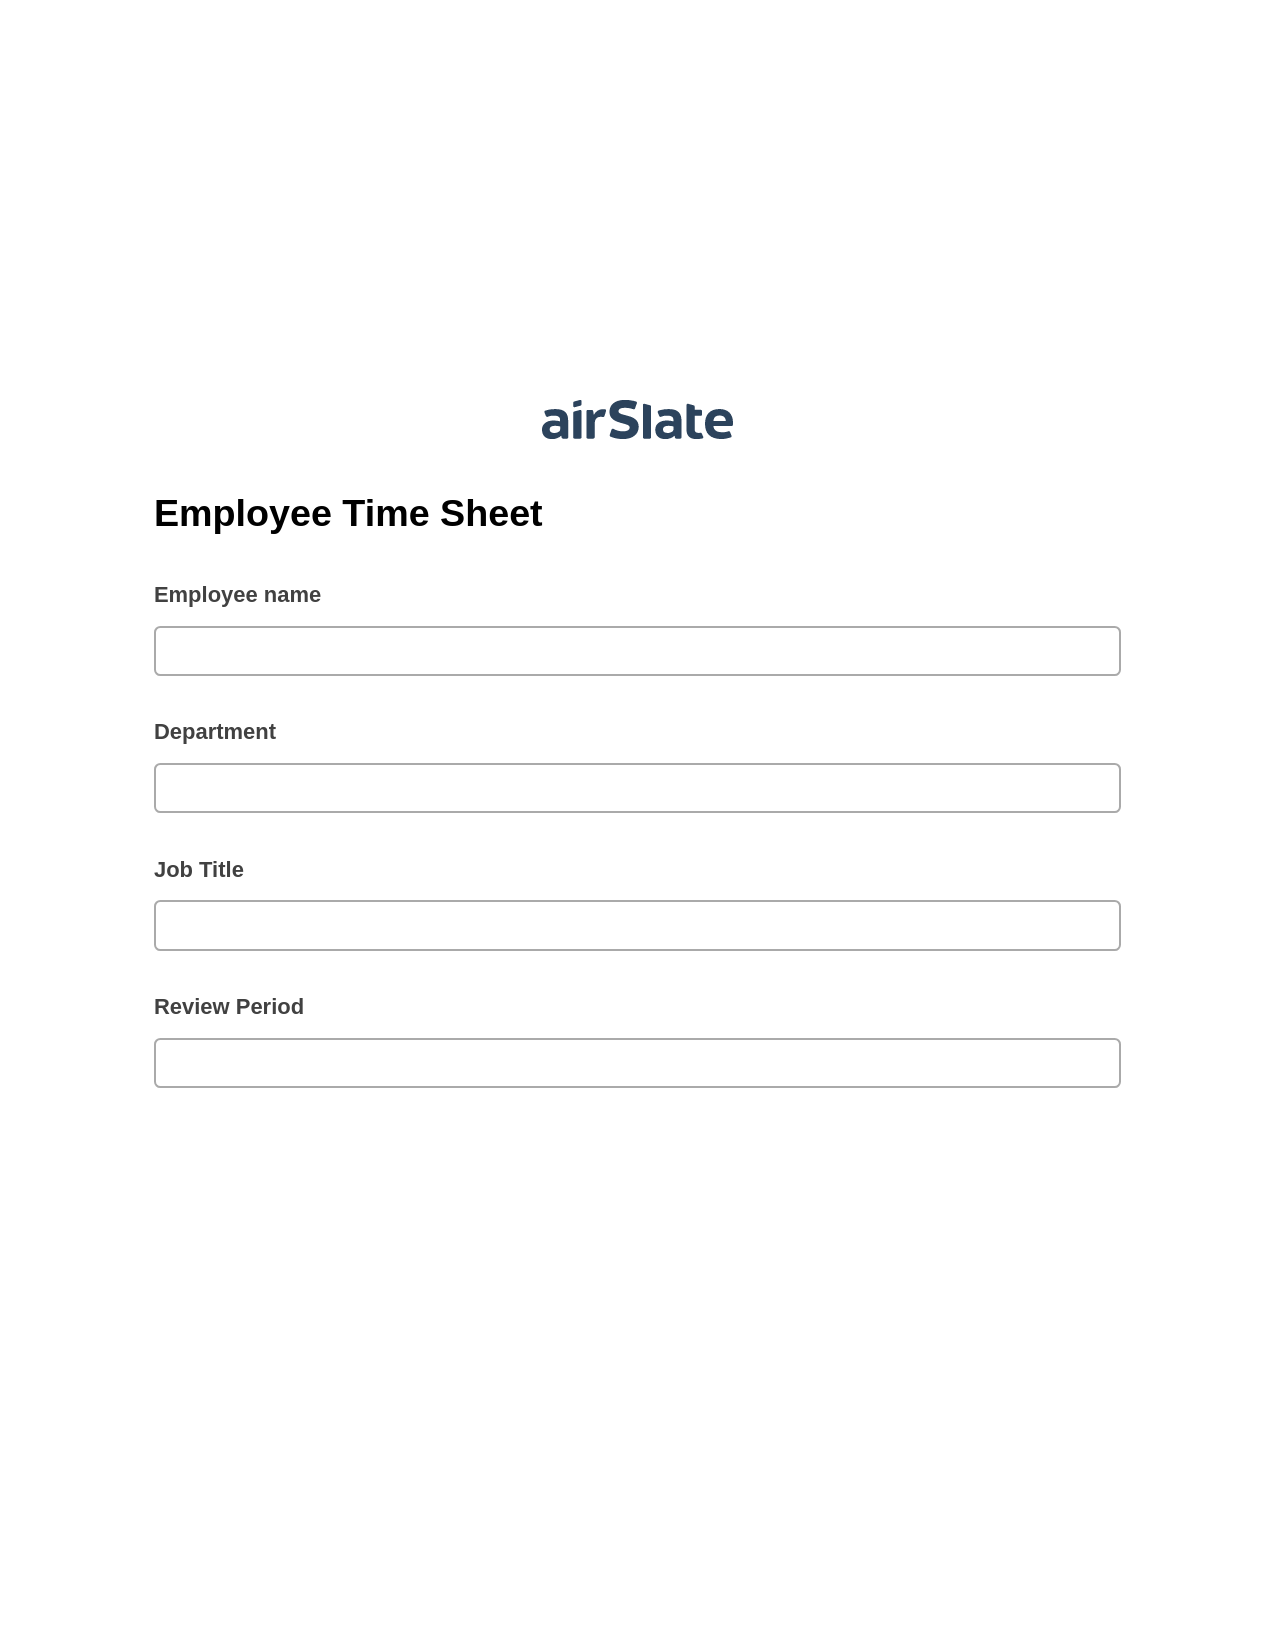 Employee Time Sheet Prefill from NetSuite records, Lock the Slate Bot, Archive to Box Bot